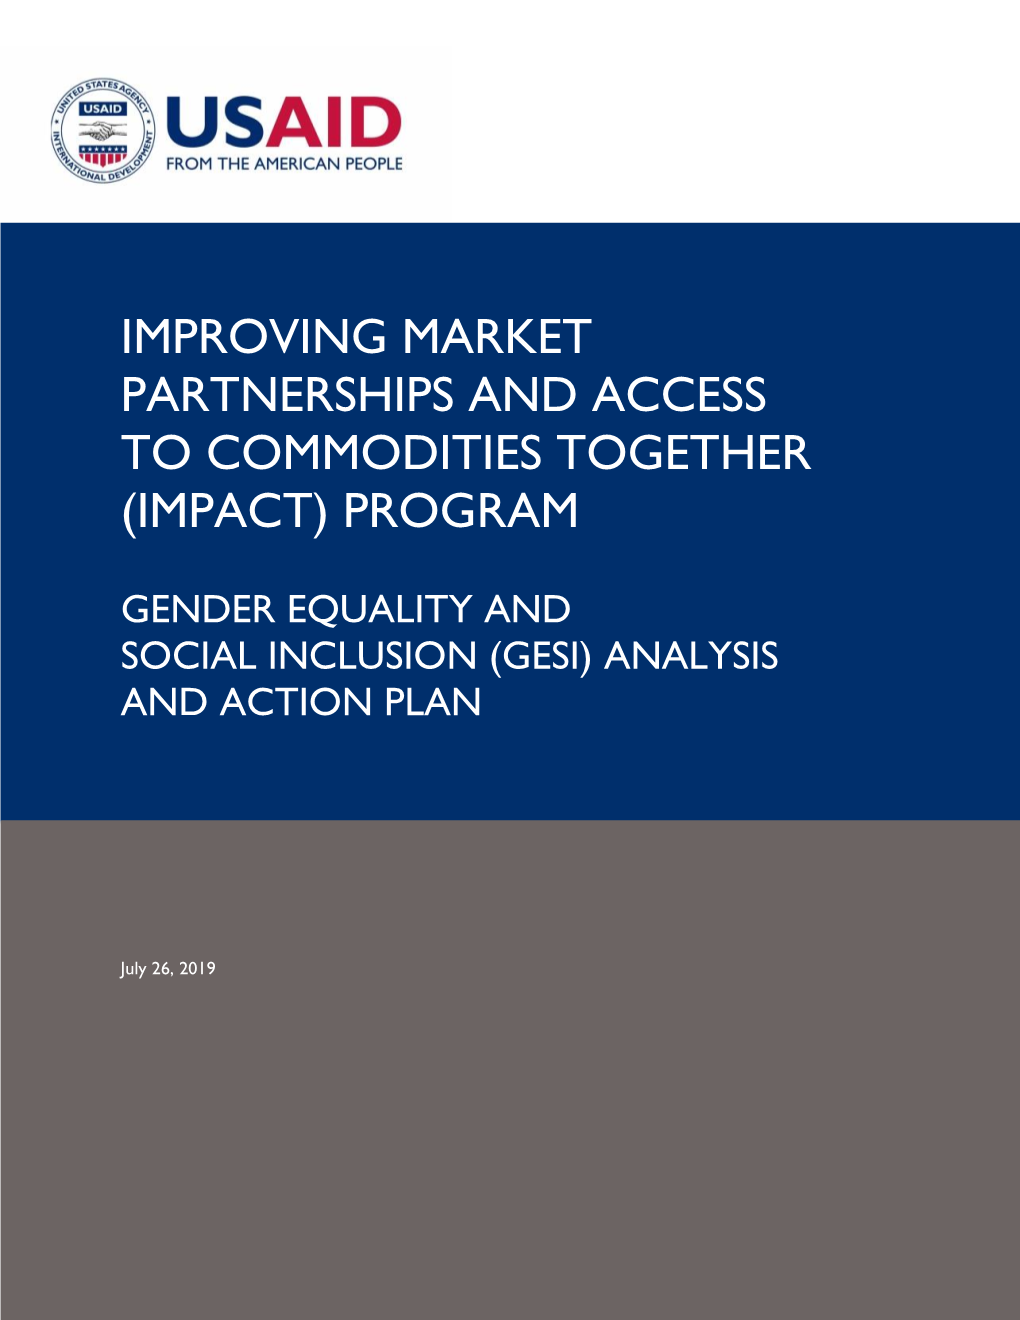 Gender Equality and Social Inclusion (Gesi) Analysis and Action Plan